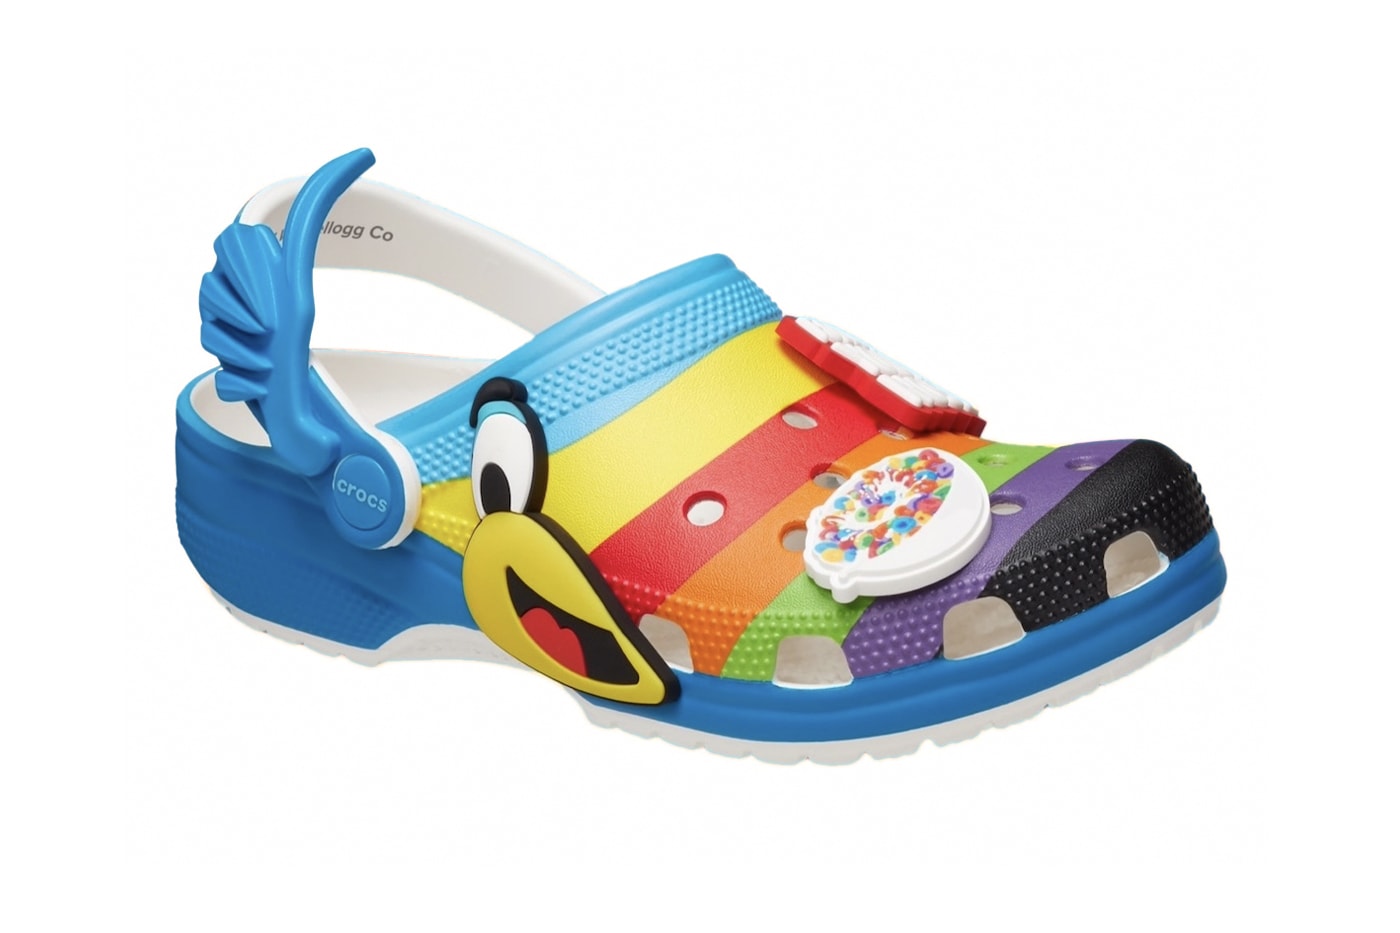 Official Look at the Froot Loops x Crocs Classic Clog 210139-90H multicolor toucan cereal bird 